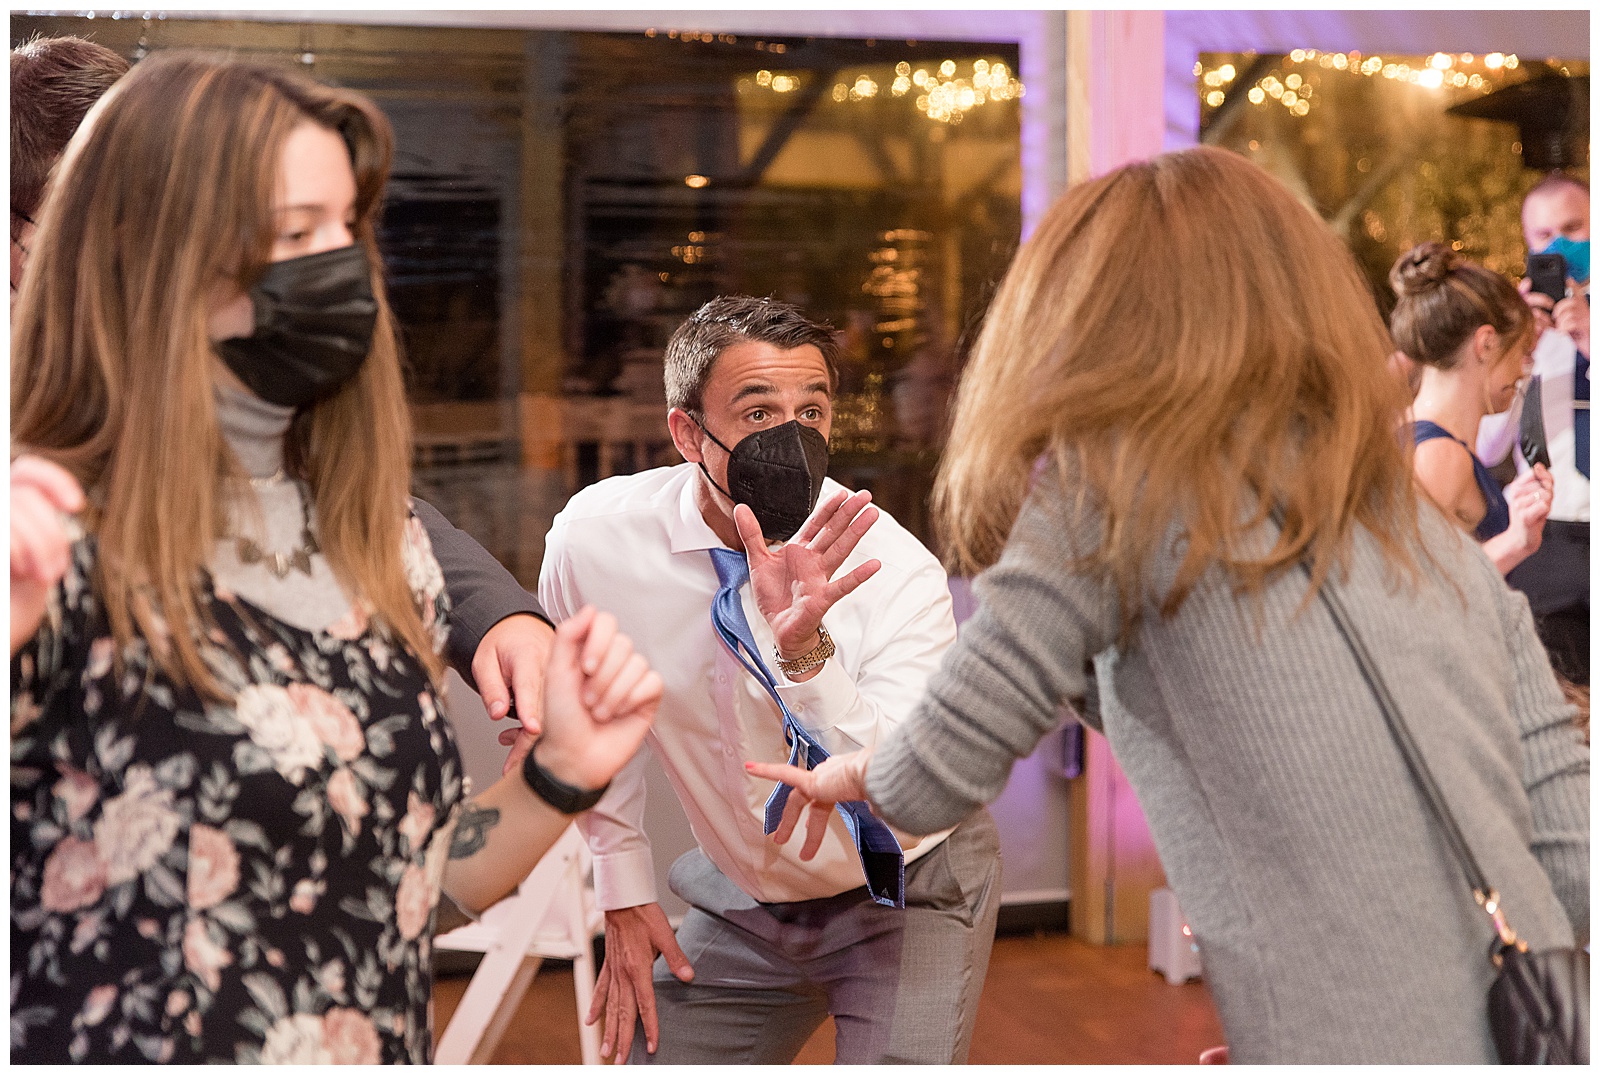 guests dancing together wearing masks during covid wedding at riverdale manor